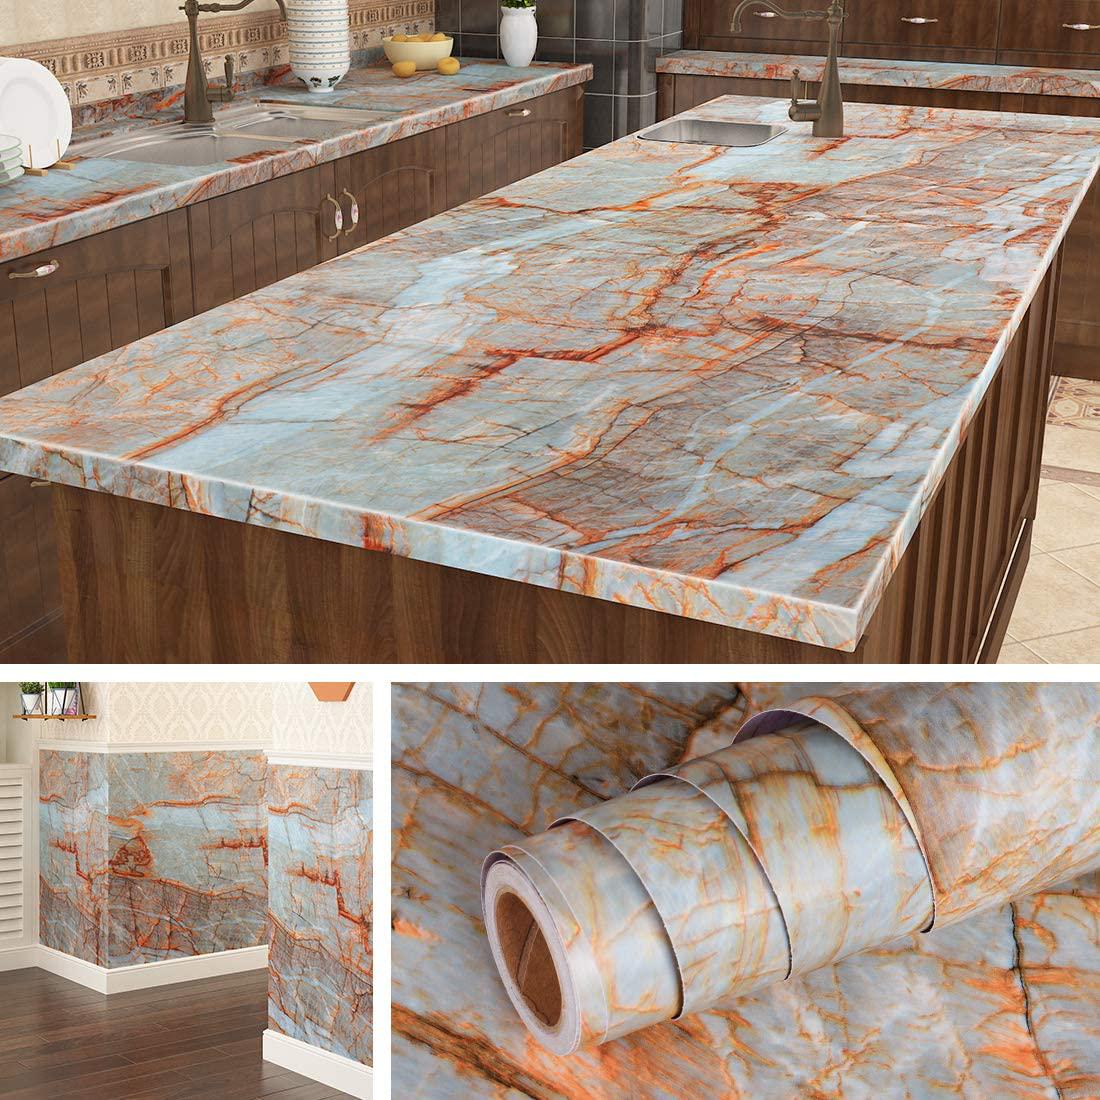 Livelynine, Livelynine 15.8 X197 Teal Marble Wallpaper Peel and Stick Countertop Paper Teal Marble Contact Paper Self Adhesive Film for Countertops Peel and Stick Table Top Covers Kitchen Bathroom Counter Top